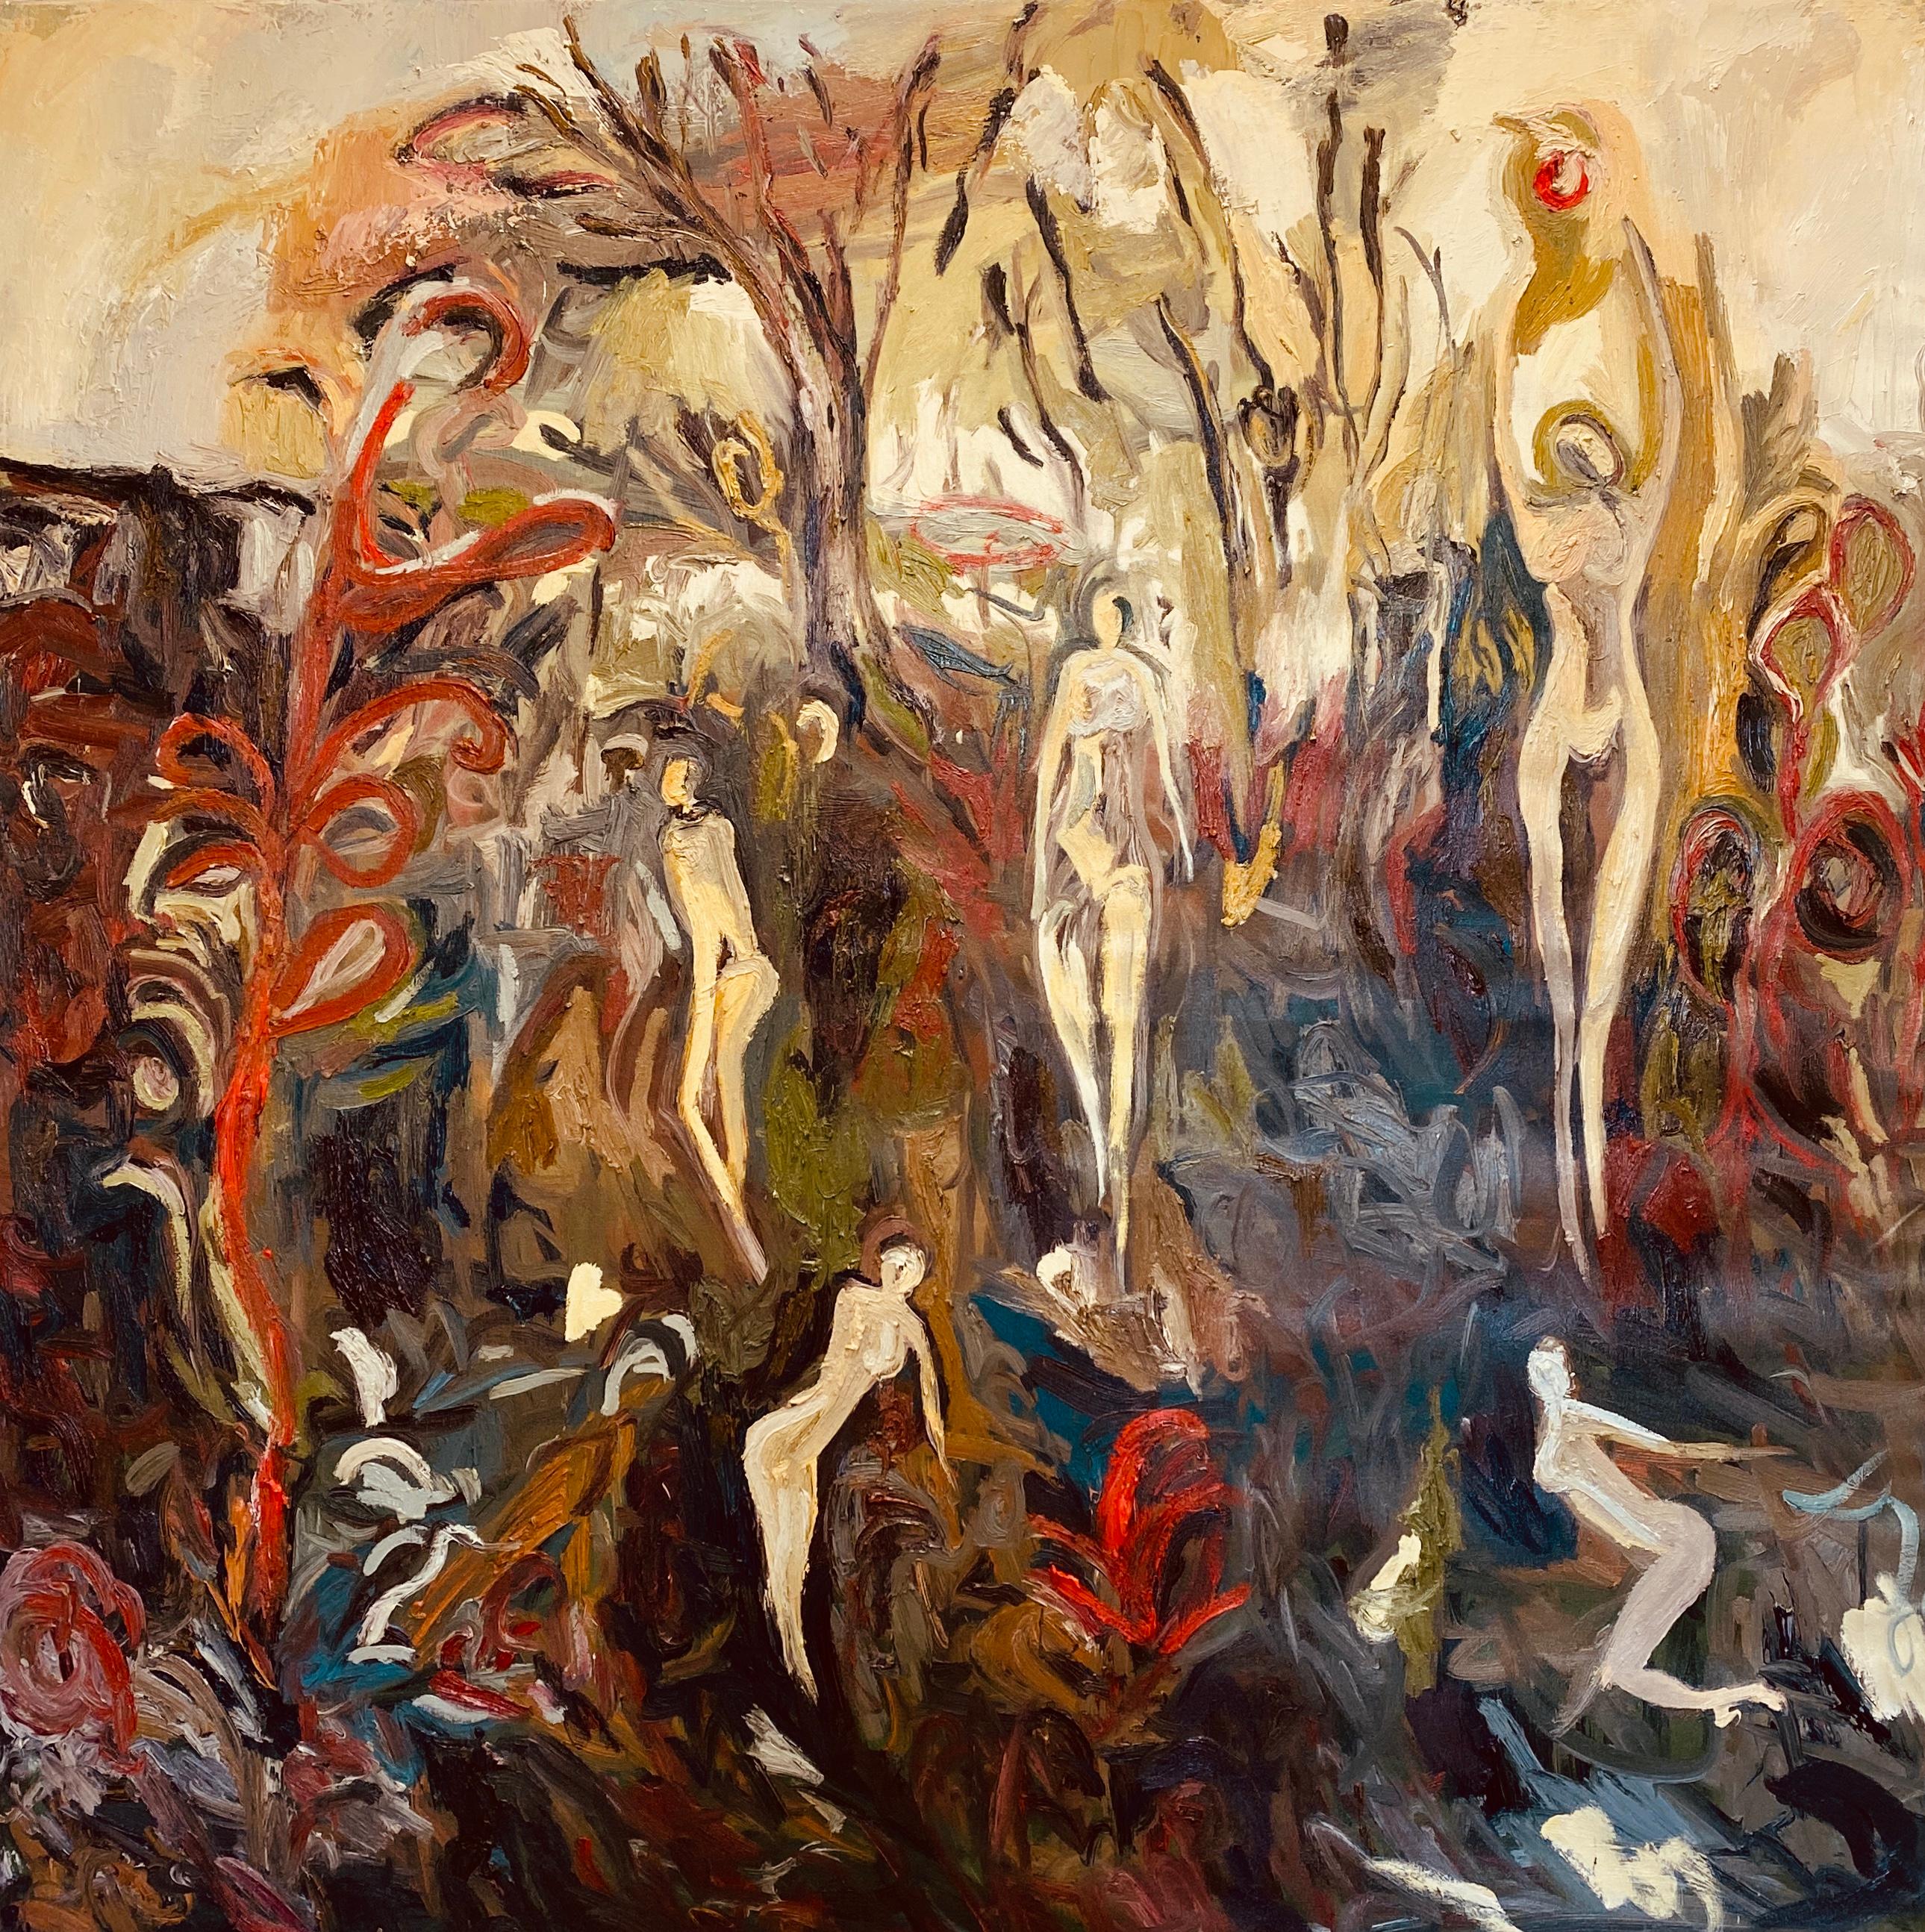 FRANCESCA OWEN  Landscape Painting - Playing in Eden, Large Abstract Expressionist Oil Painting